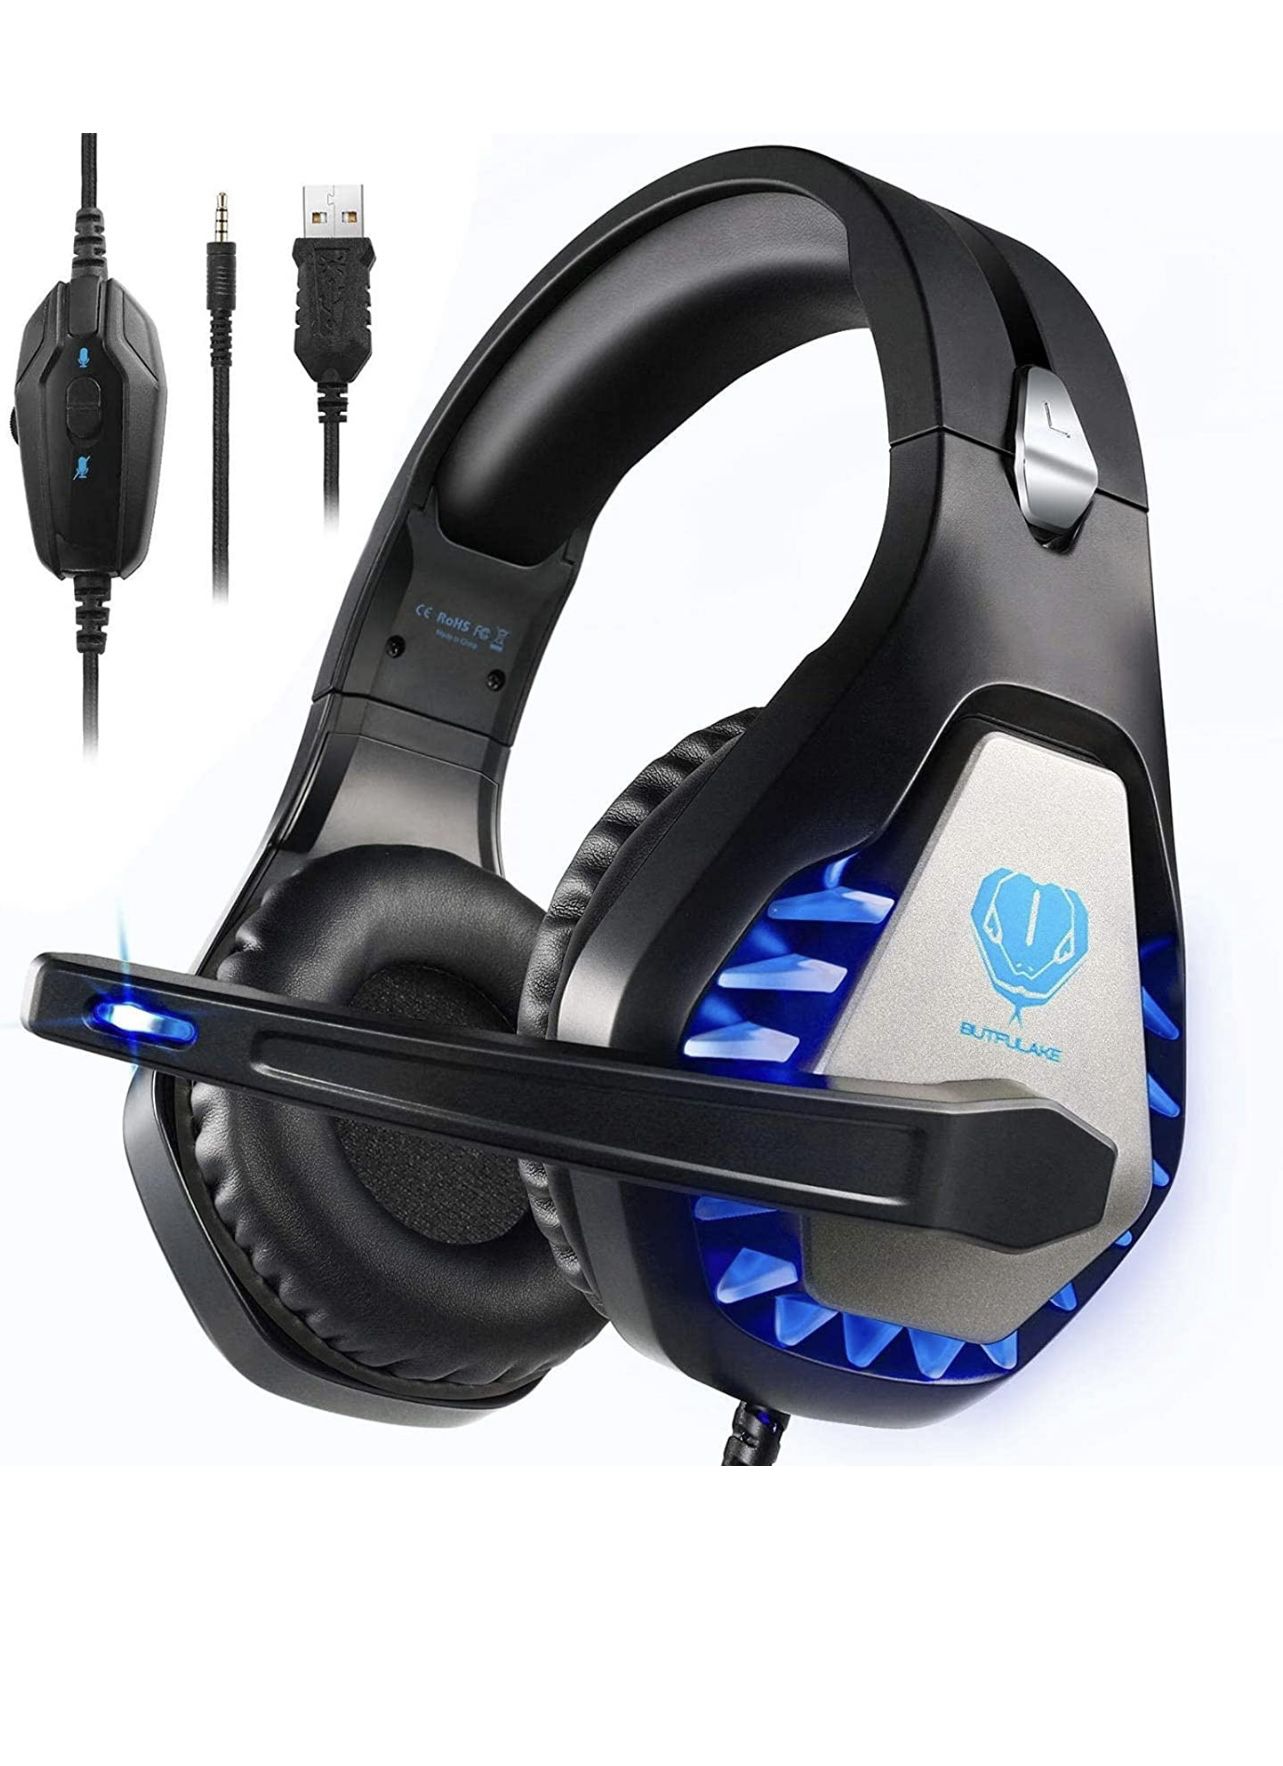 BUTFULAKE GH-1 Gaming Headset for PS5, PS4, Xbox One, Xbox One S, PC, Nintendo Switch, Mac, Laptop, 3.5mm Wired Pro Stereo Over Ear Gaming Headphones 